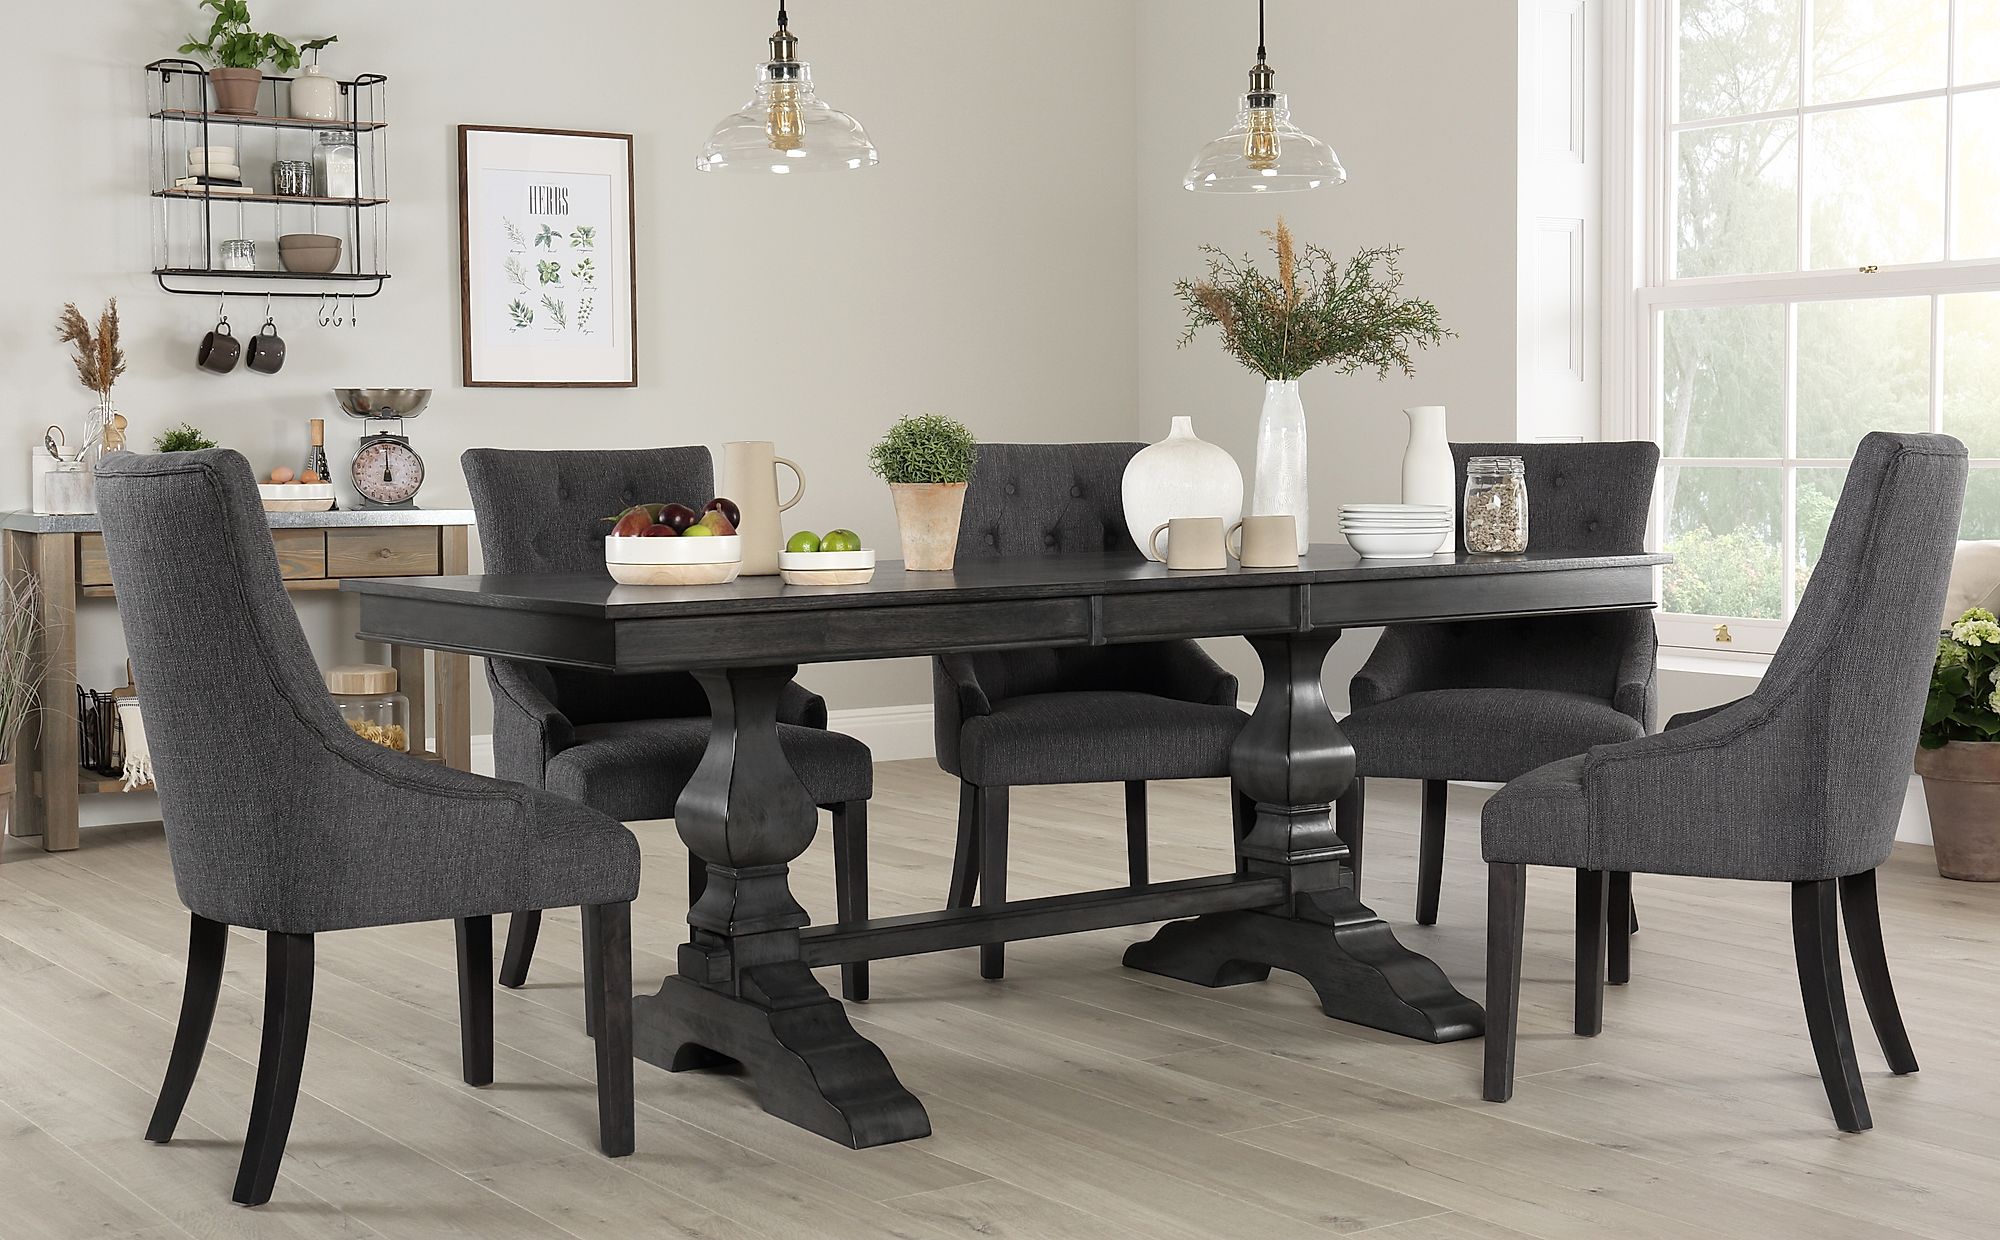 Cavendish Grey Wood Extending Dining Table with 8 Duke ...